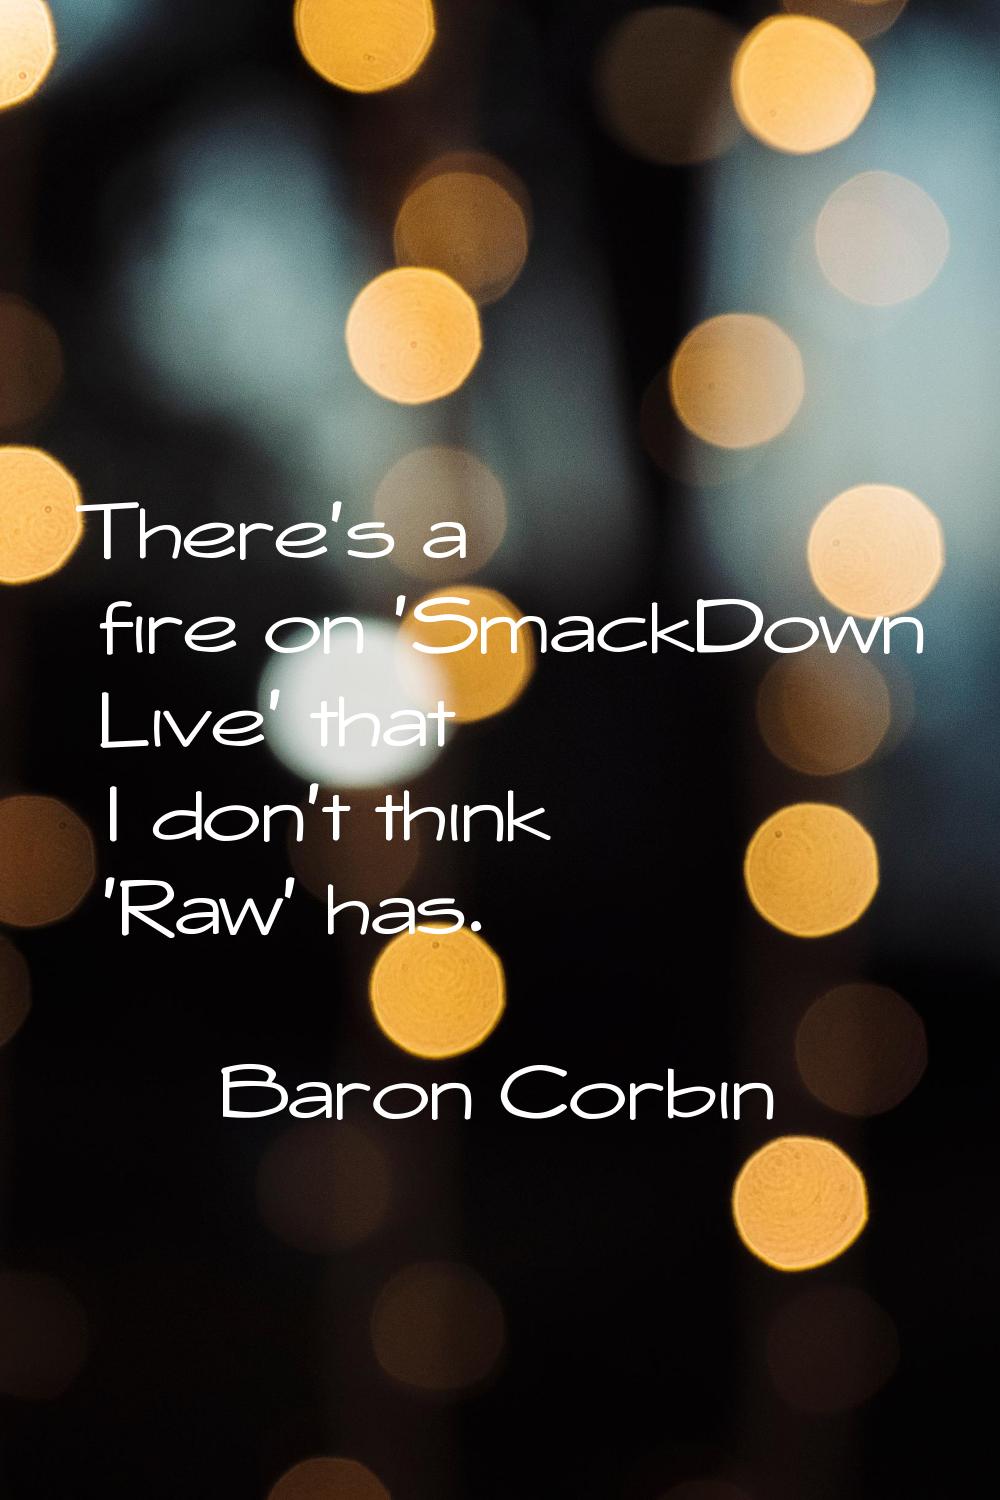 There's a fire on 'SmackDown Live' that I don't think 'Raw' has.